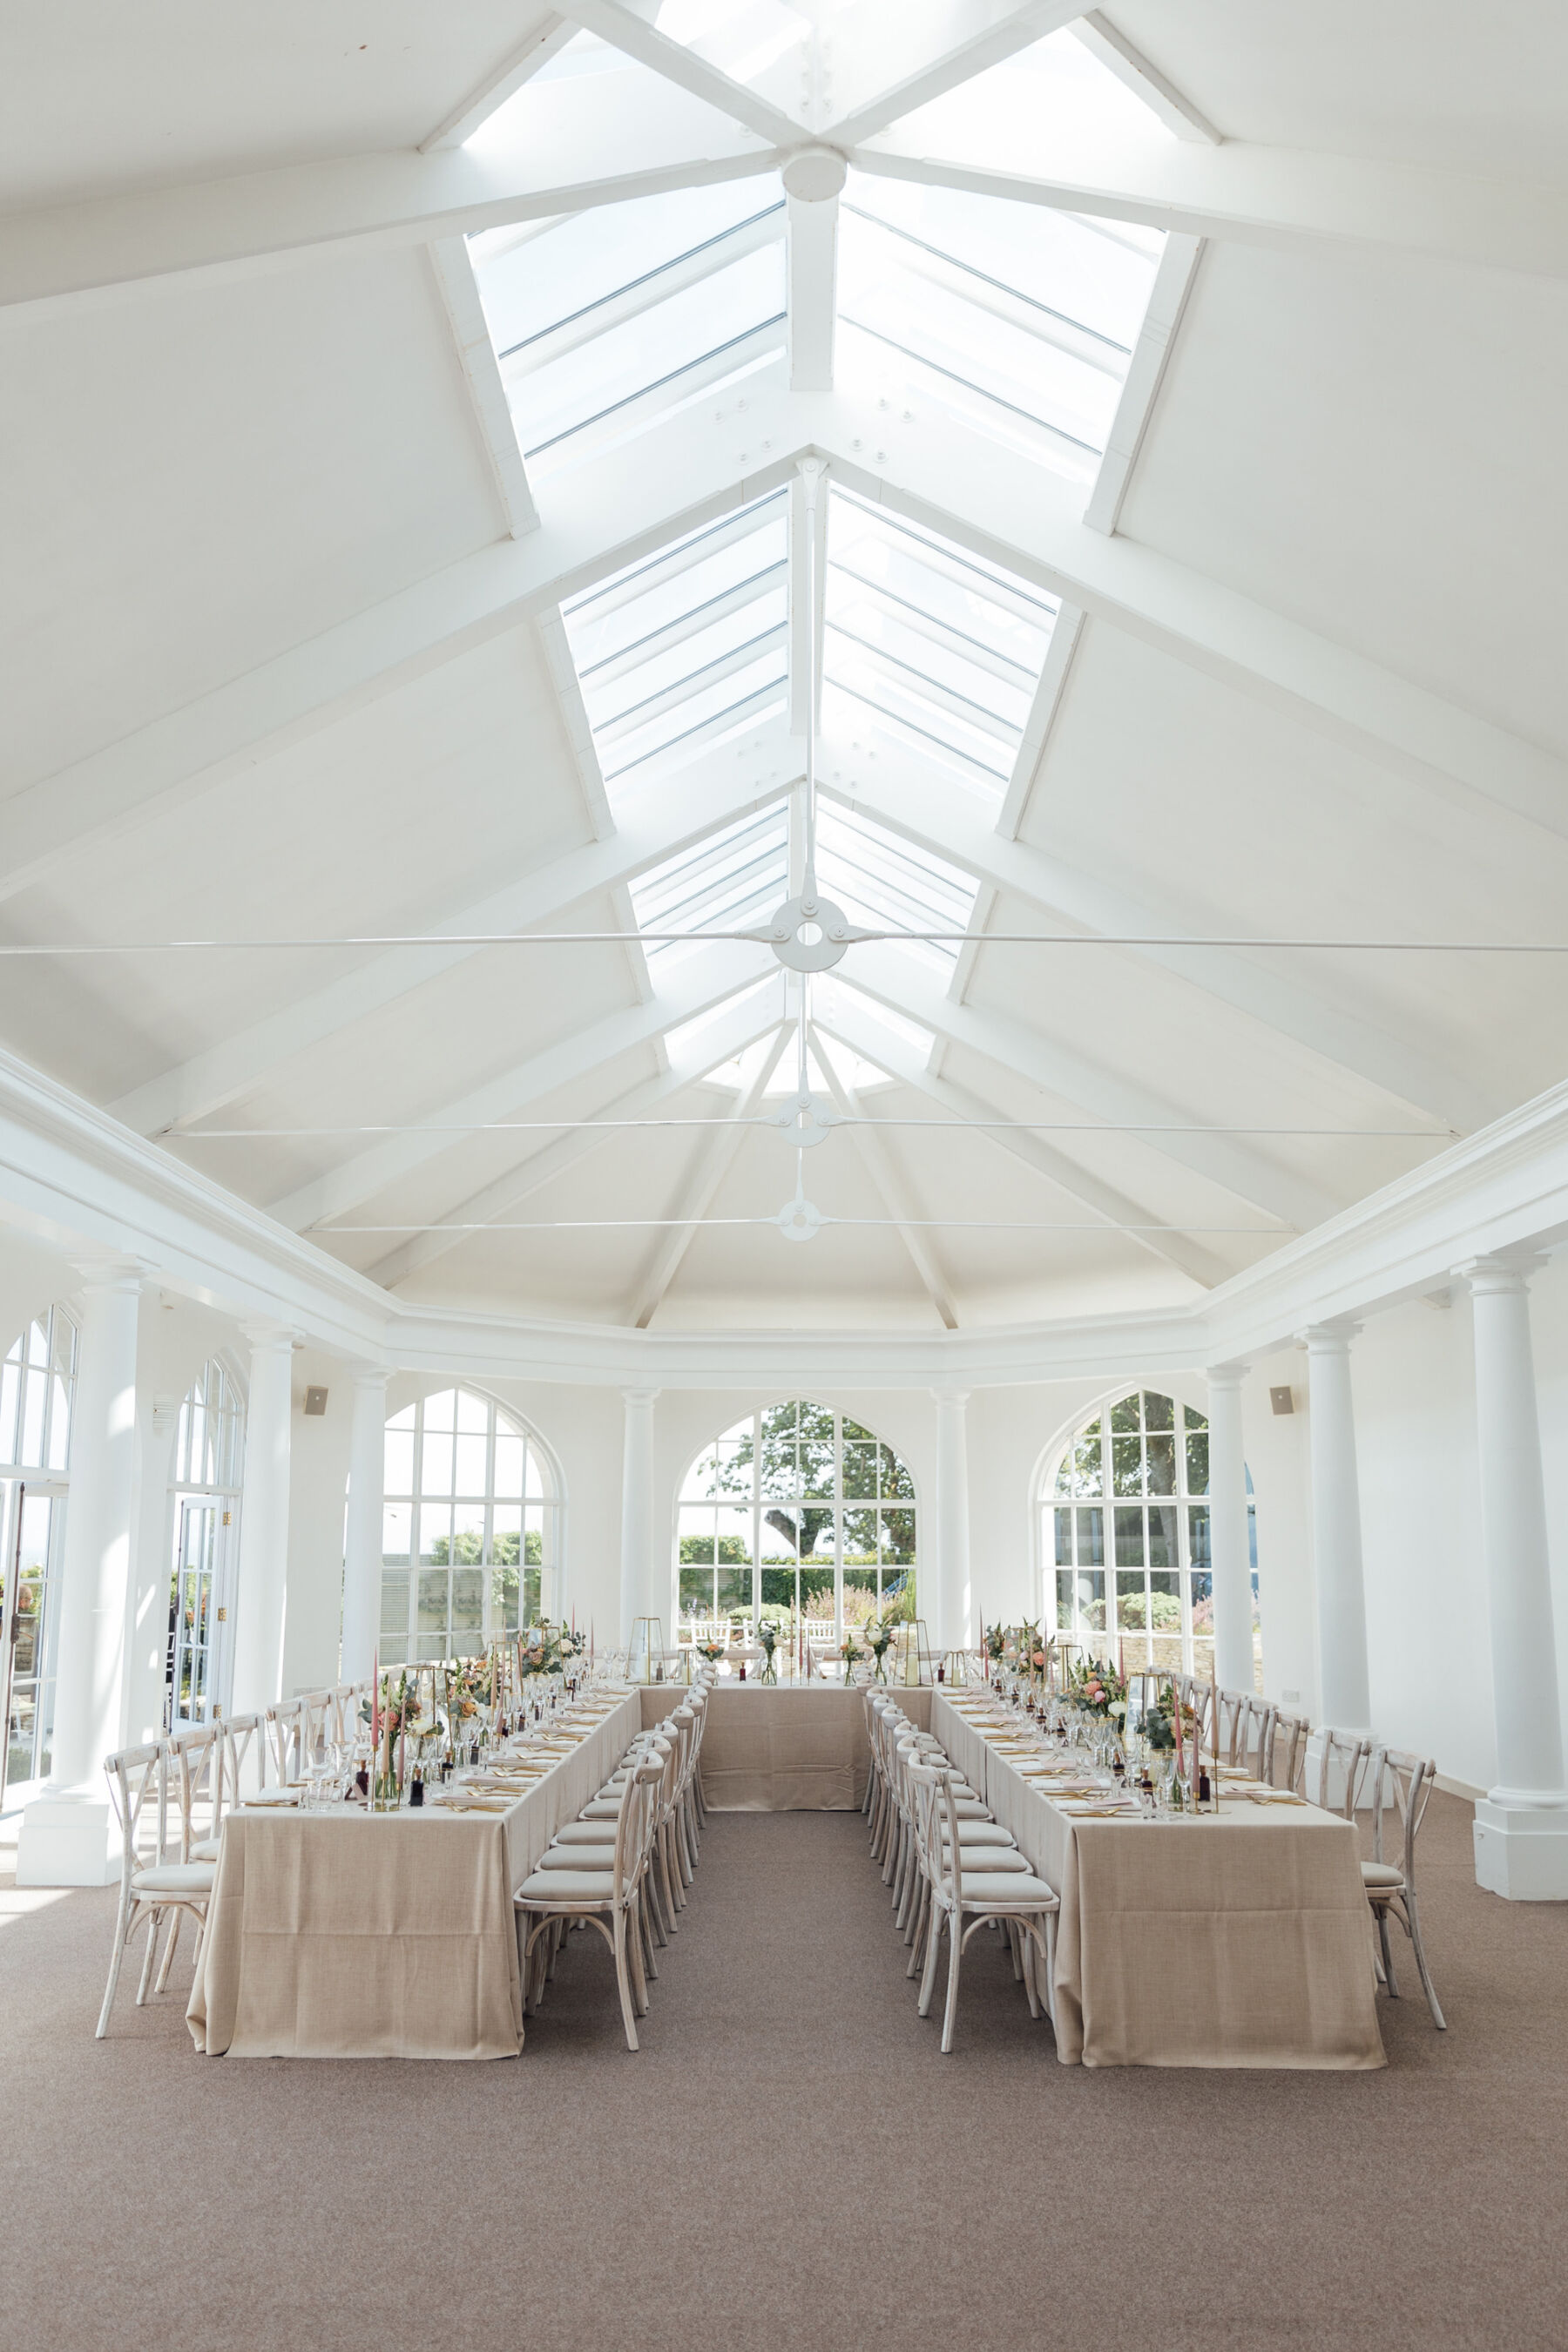 Inside the spacious and light filled reception room at The Pennsylvania Castle Estate - a Dorset wedding venue on a clifftop with incredible sea views.